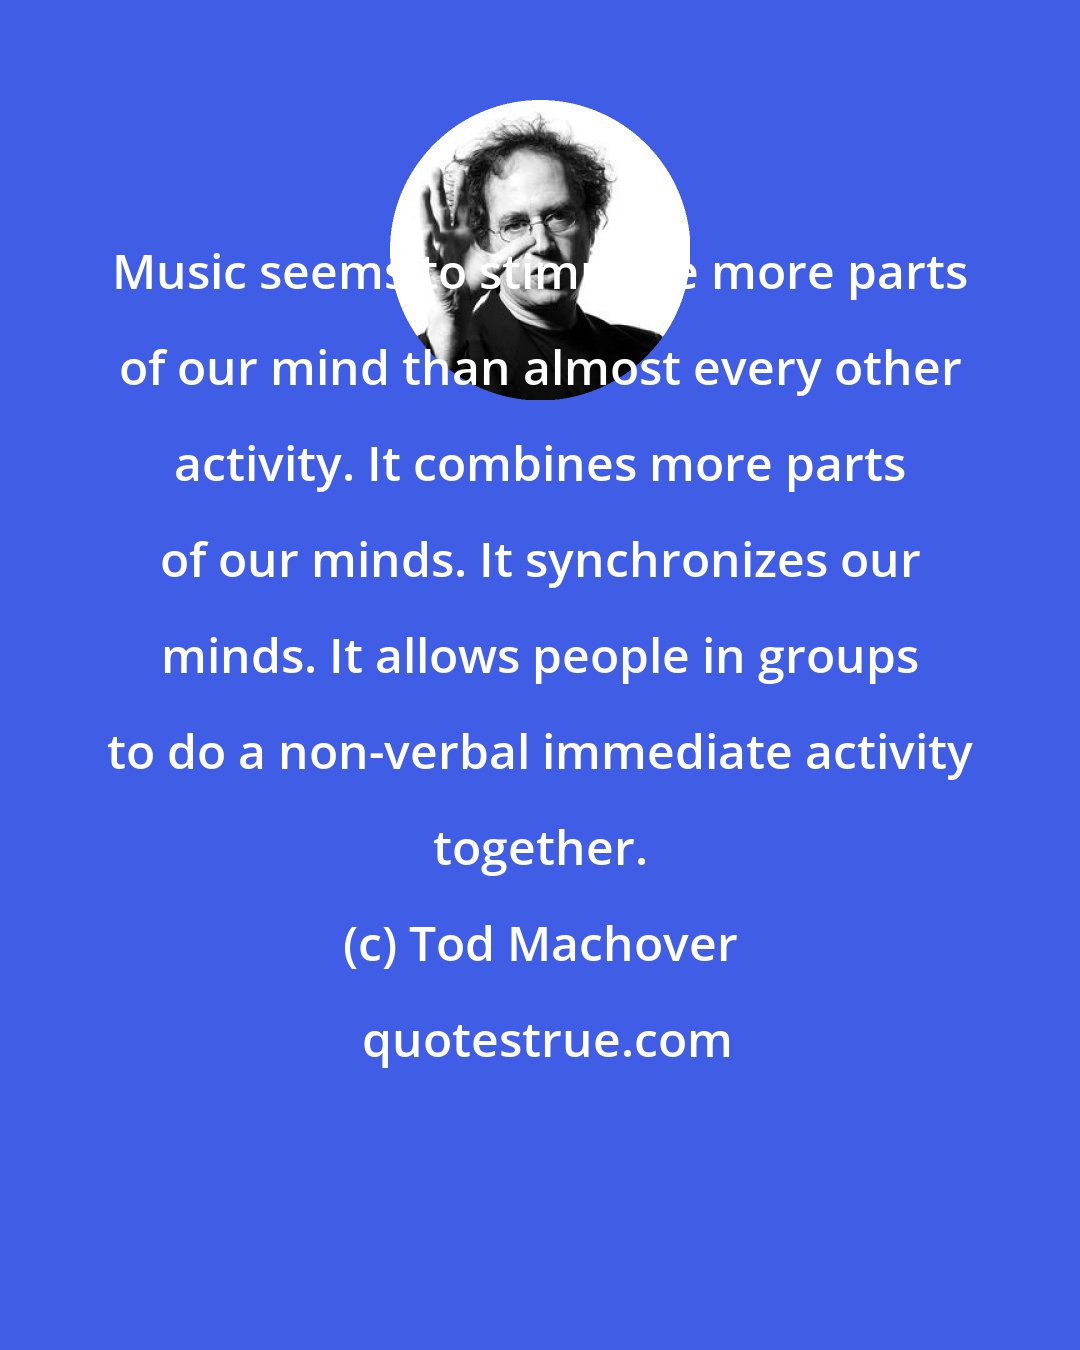 Tod Machover: Music seems to stimulate more parts of our mind than almost every other activity. It combines more parts of our minds. It synchronizes our minds. It allows people in groups to do a non-verbal immediate activity together.